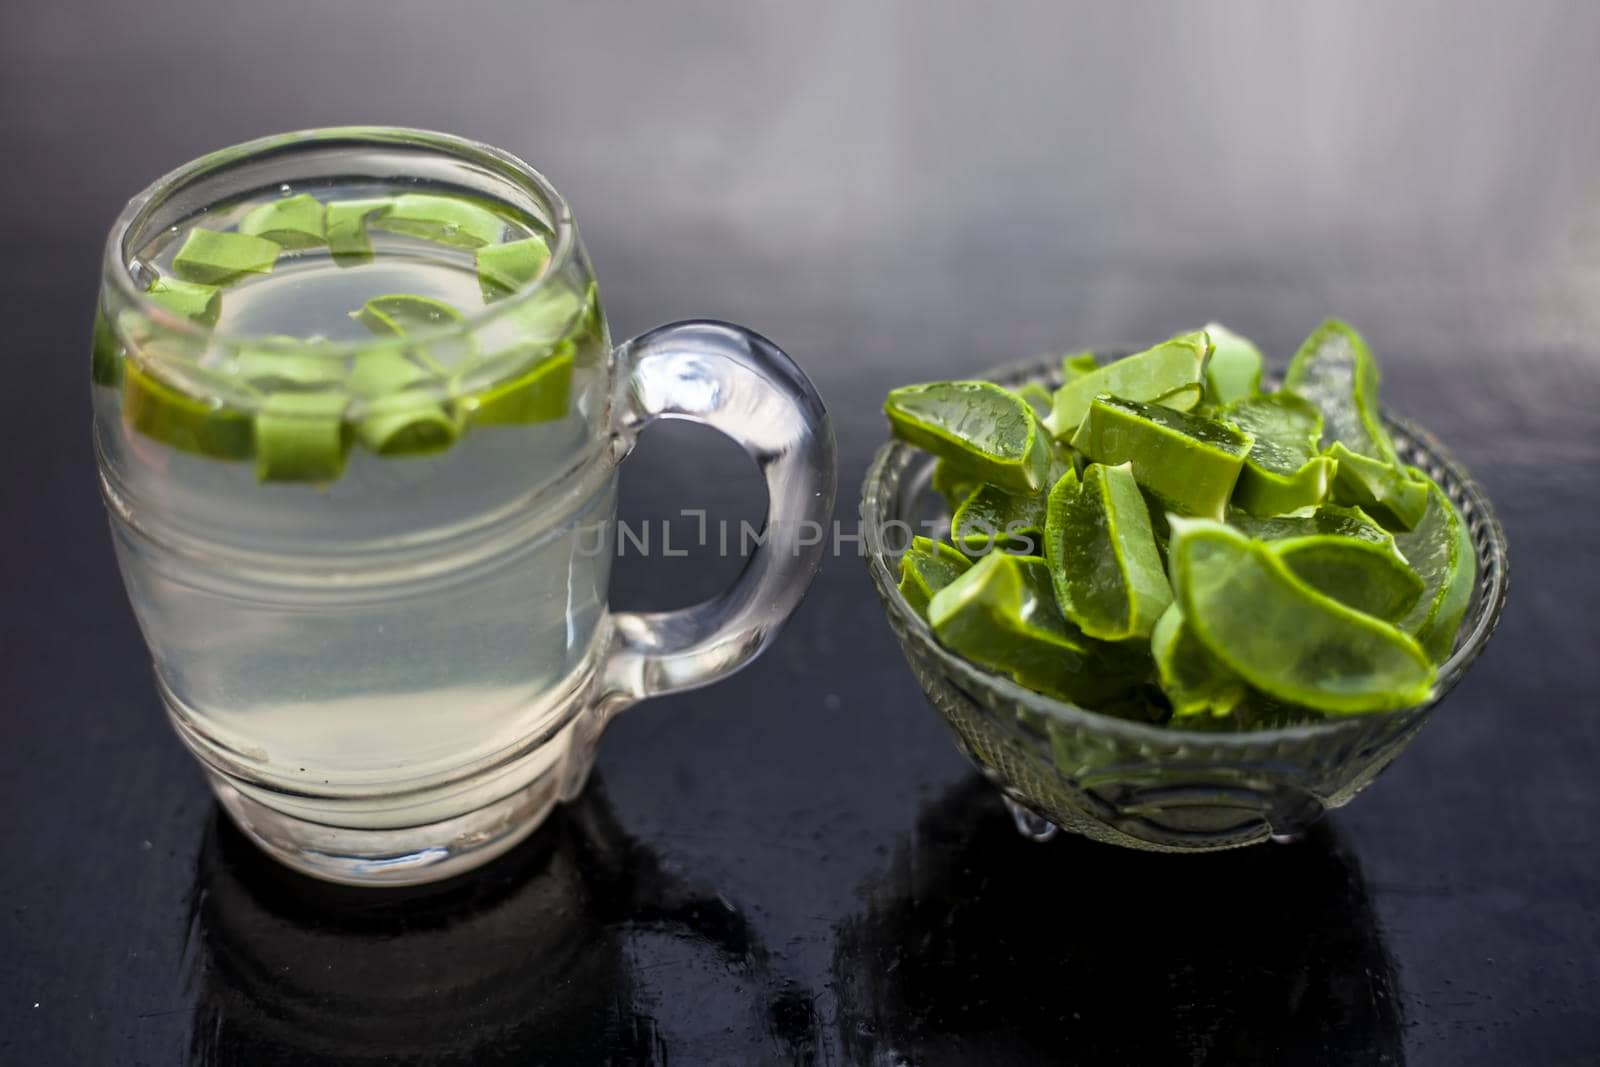 Close up of glass mug on wooden surface containing aloe vera detox drink in along with its entire raw ingredients with it. Horizontal shot with blurred background. by mirzamlk